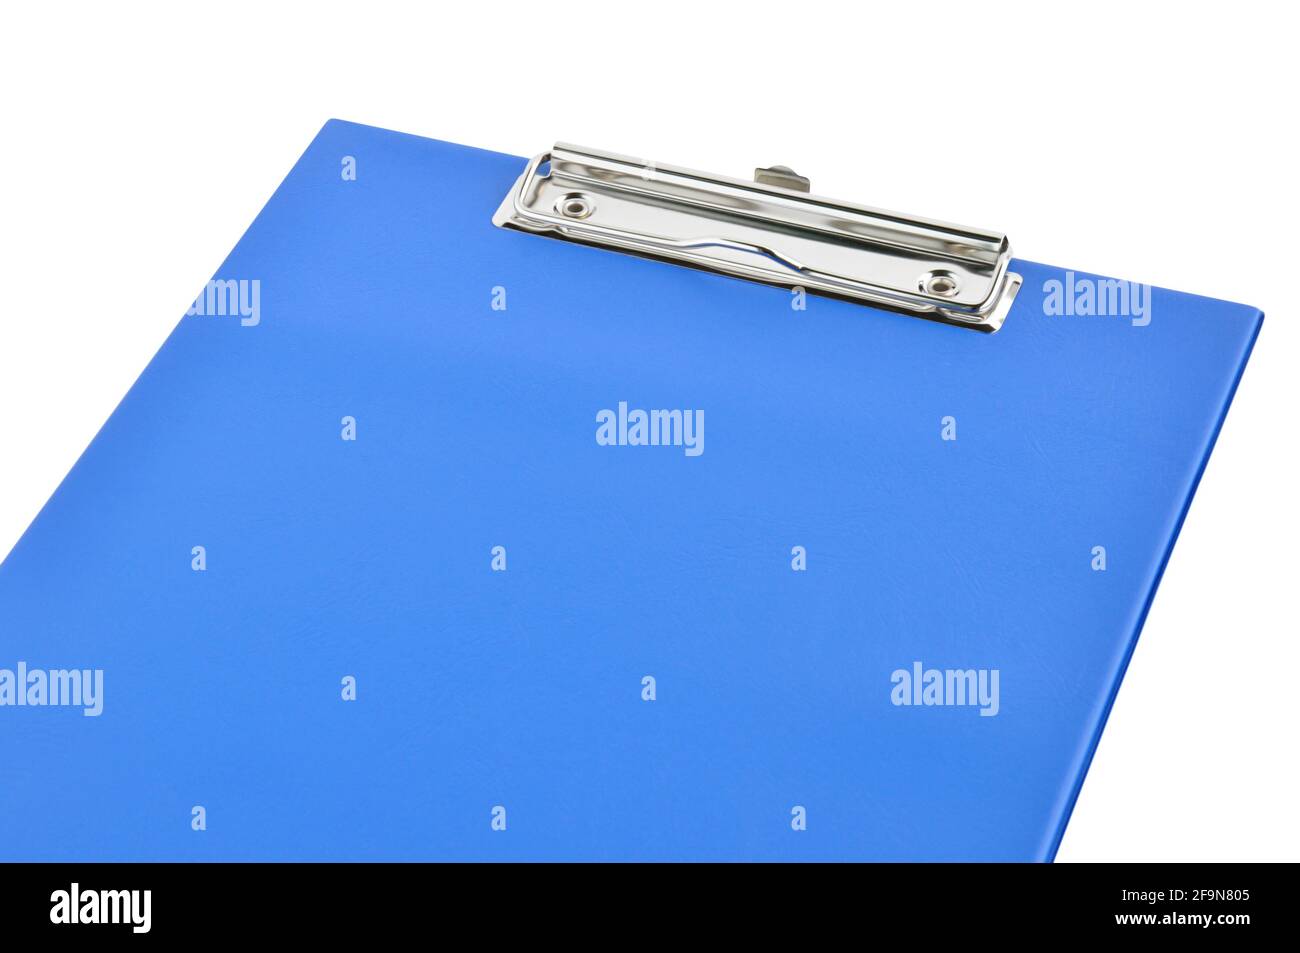 Clipboard - blue plastic clipboard or writing board isolated on white background Stock Photo